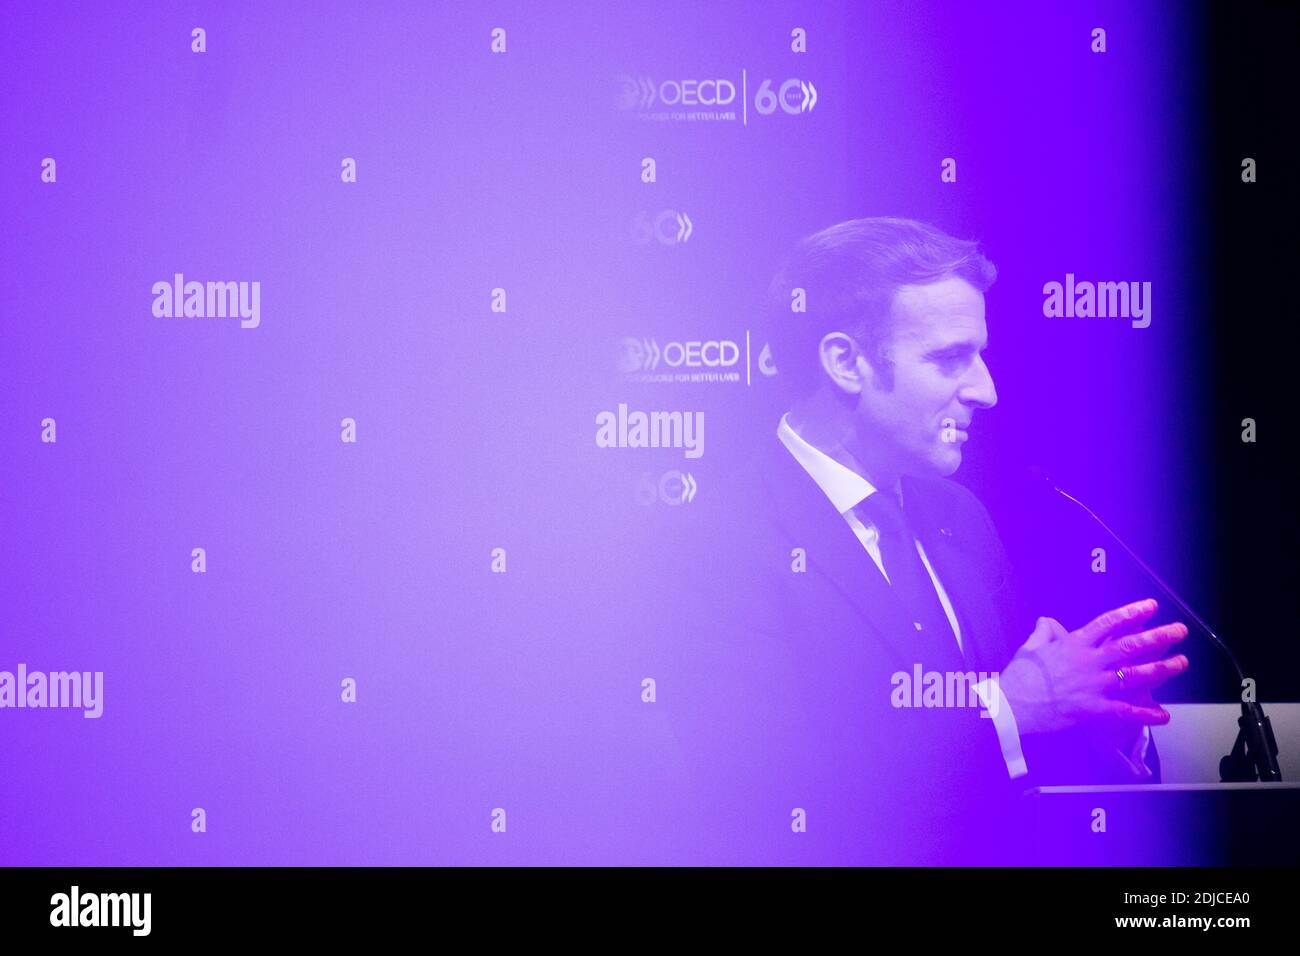 Emmanuel Macron, French President during the celebration of the 60th anniversary of OECD Convention signing in Paris, France, on December 14, 2020. Photo by Romain Gaillard/Pool/ABACAPRESS.COM Stock Photo